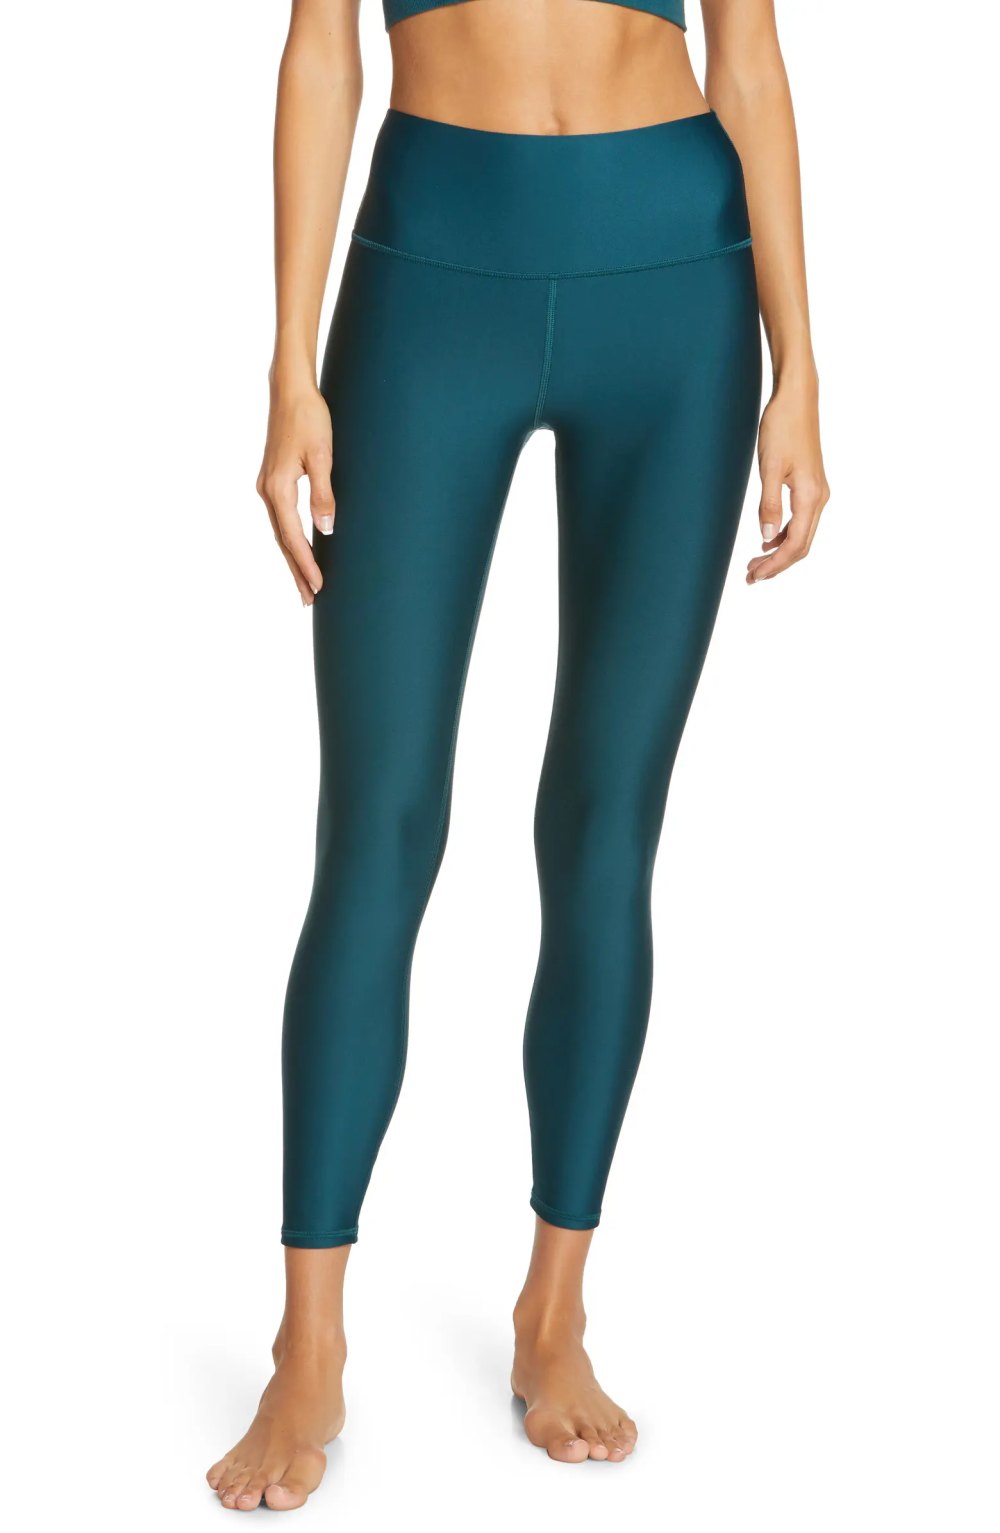 Alo Yoga leggings: Save 20% on the best Airbrush and Airlift